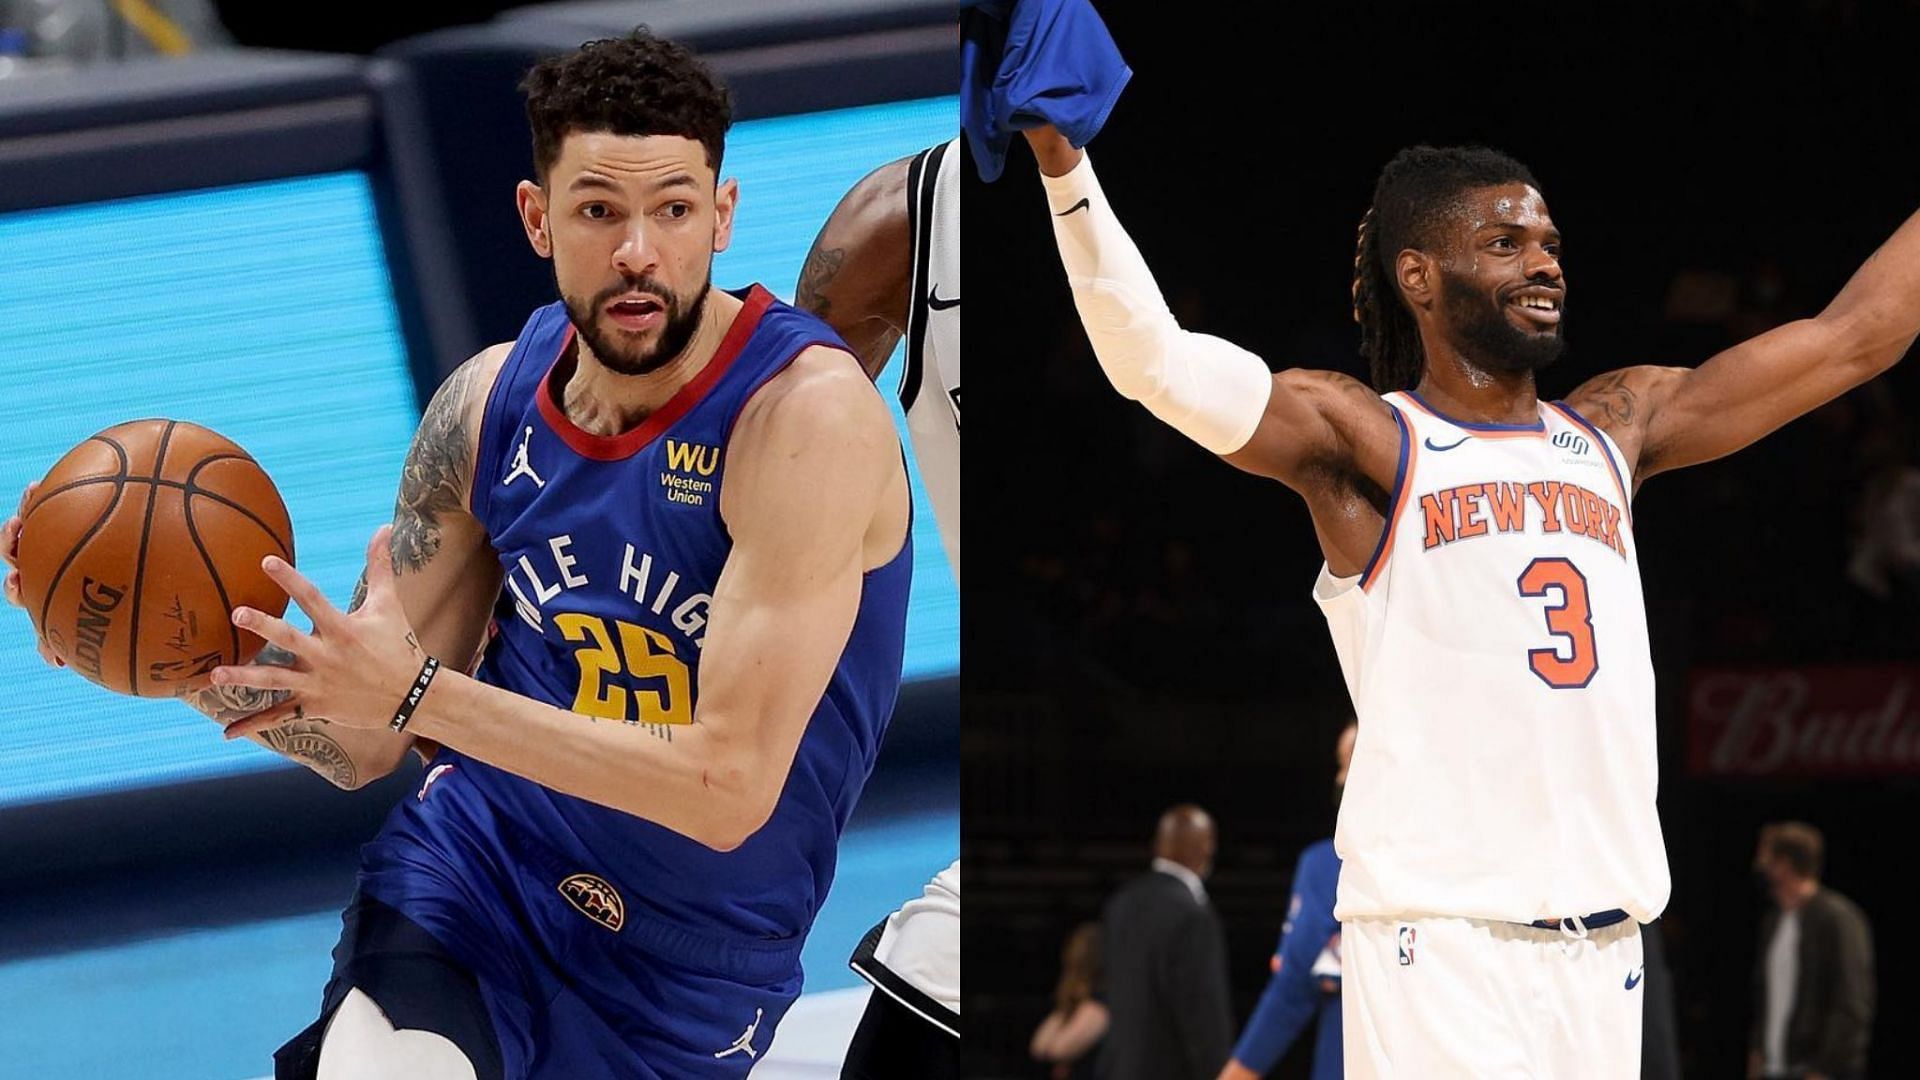 Austin Rivers and Nerlens Noel are free agents this season